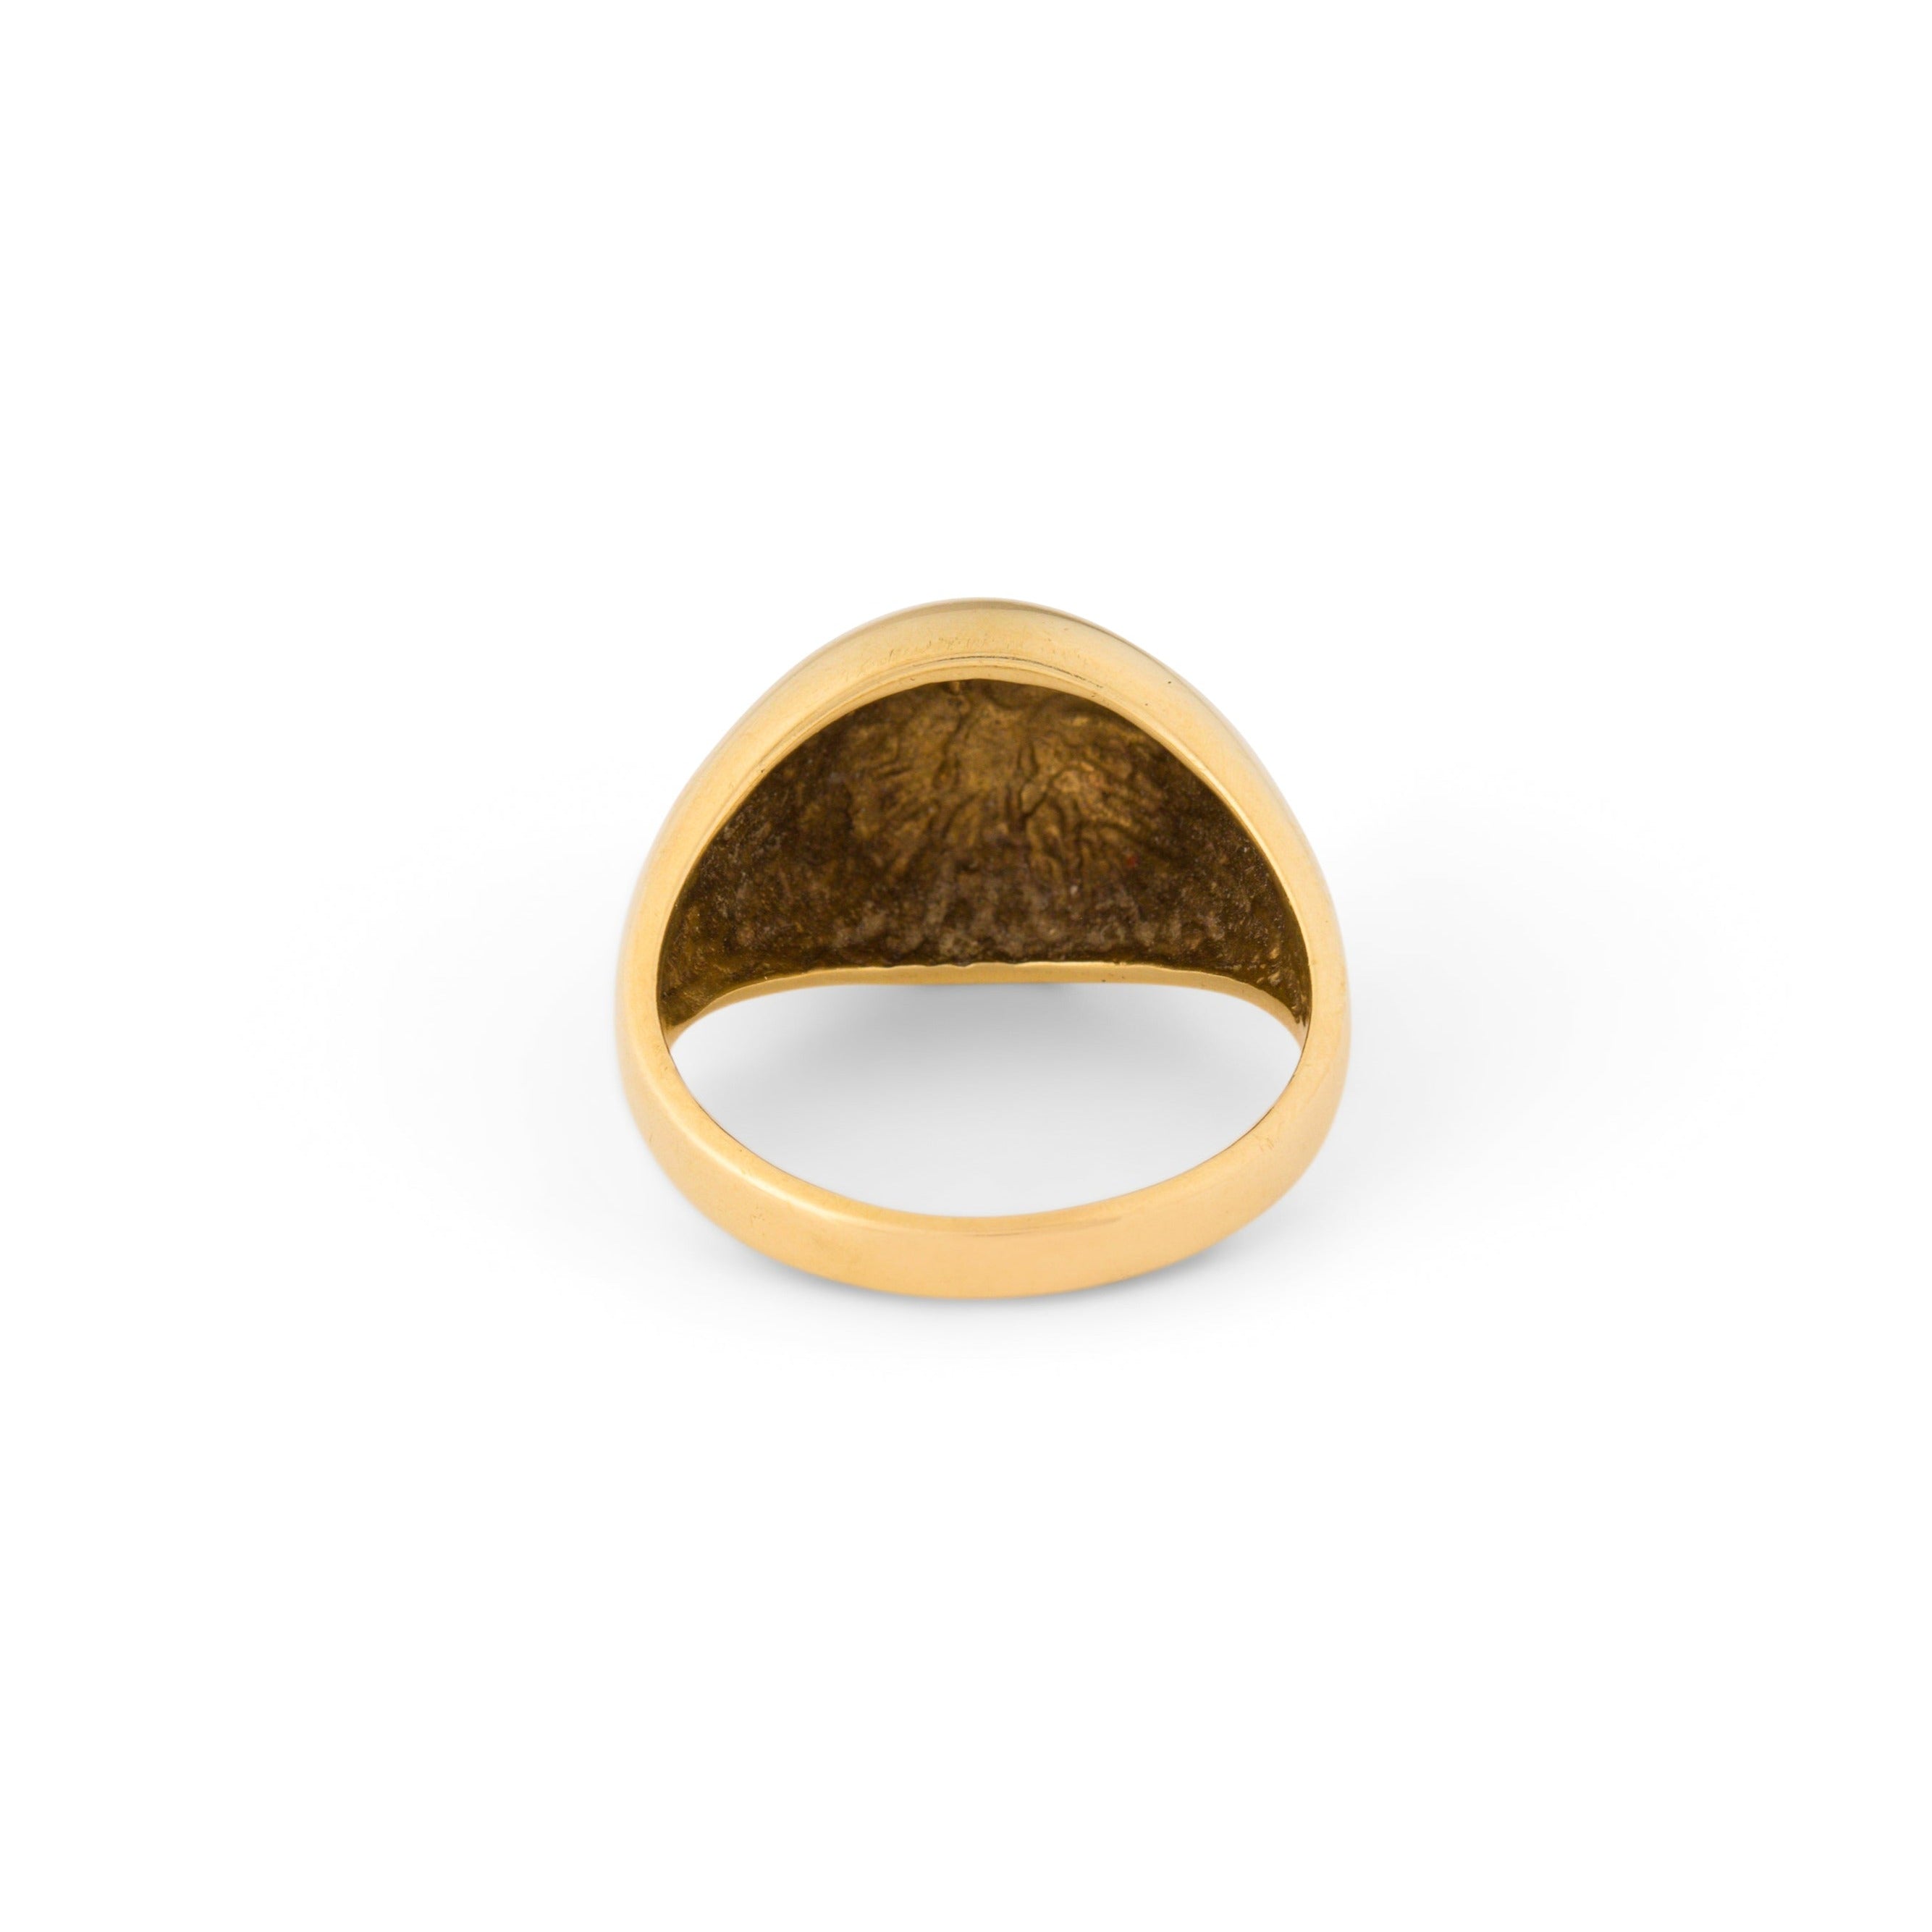 Bombe 14k Gold Dome Ring